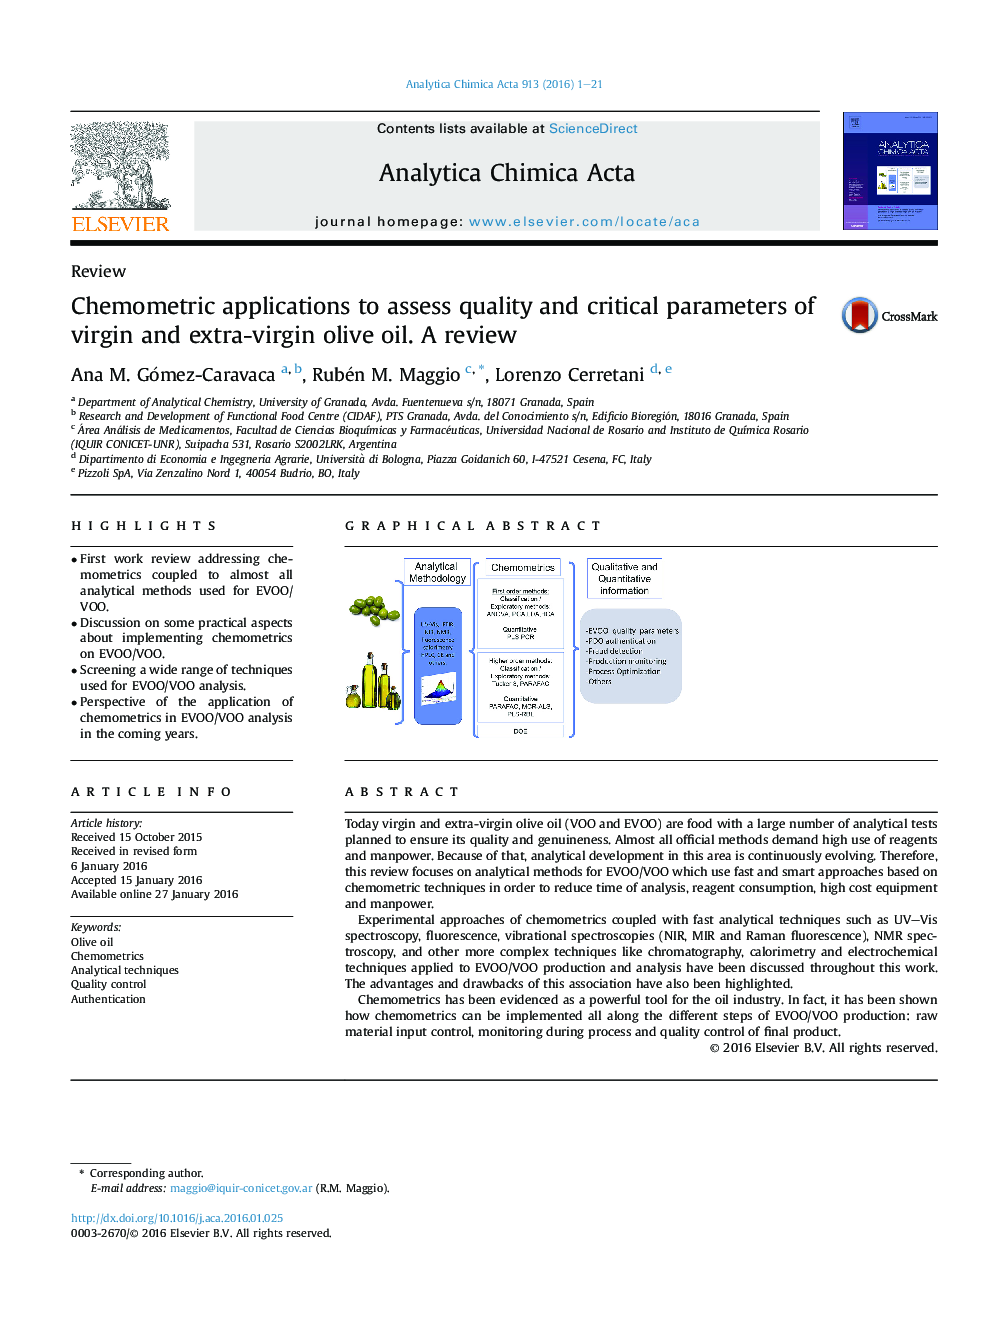 Chemometric applications to assess quality and critical parameters of virgin and extra-virgin olive oil. A review